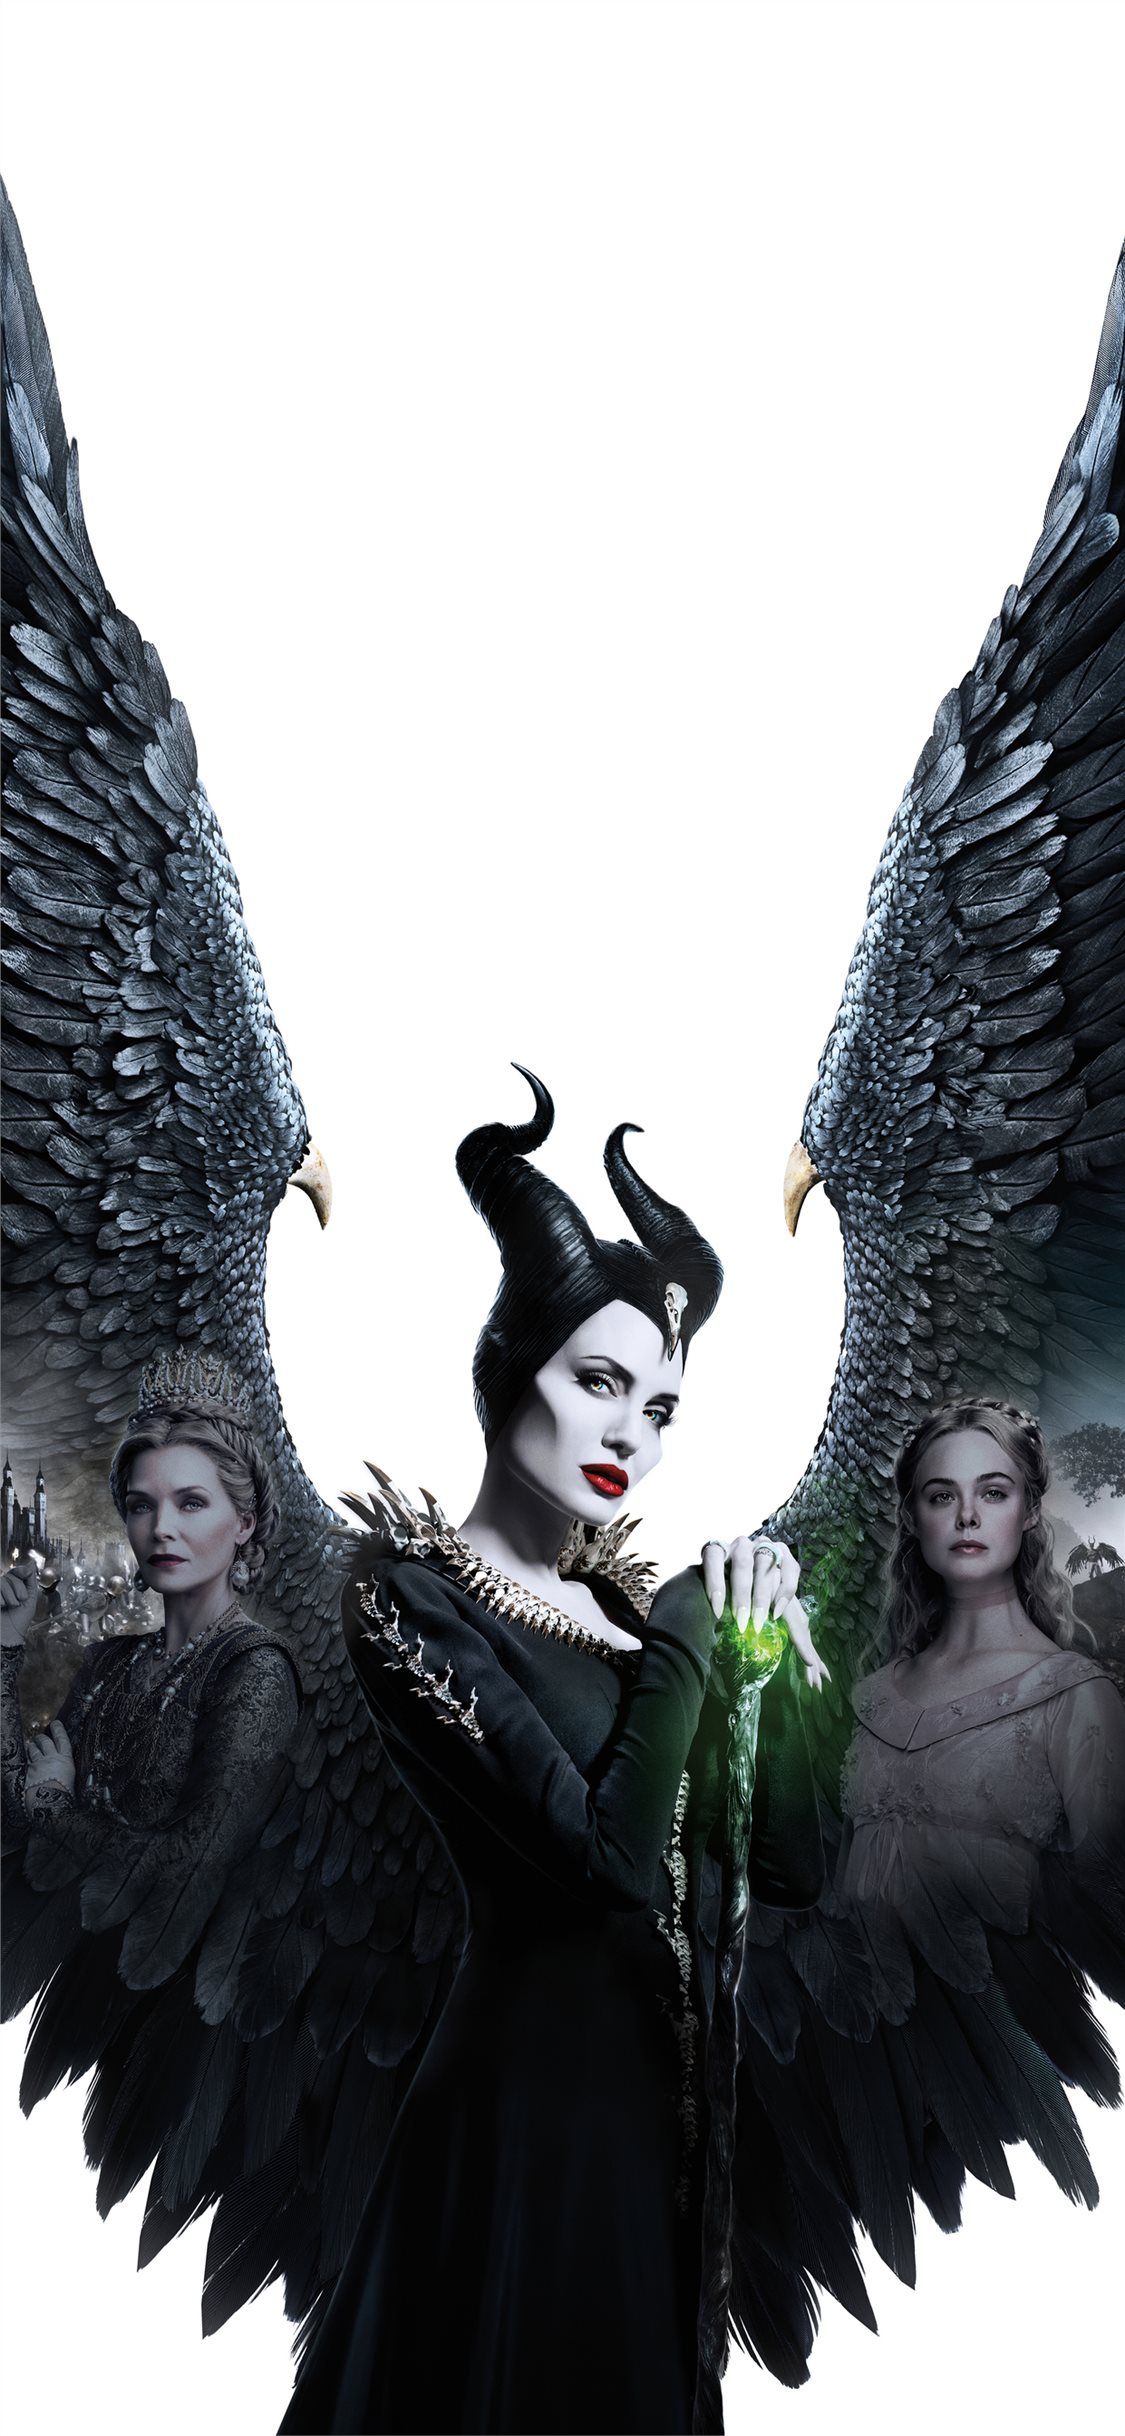 4K 8K Poster Of Maleficent 2 Wallpapers